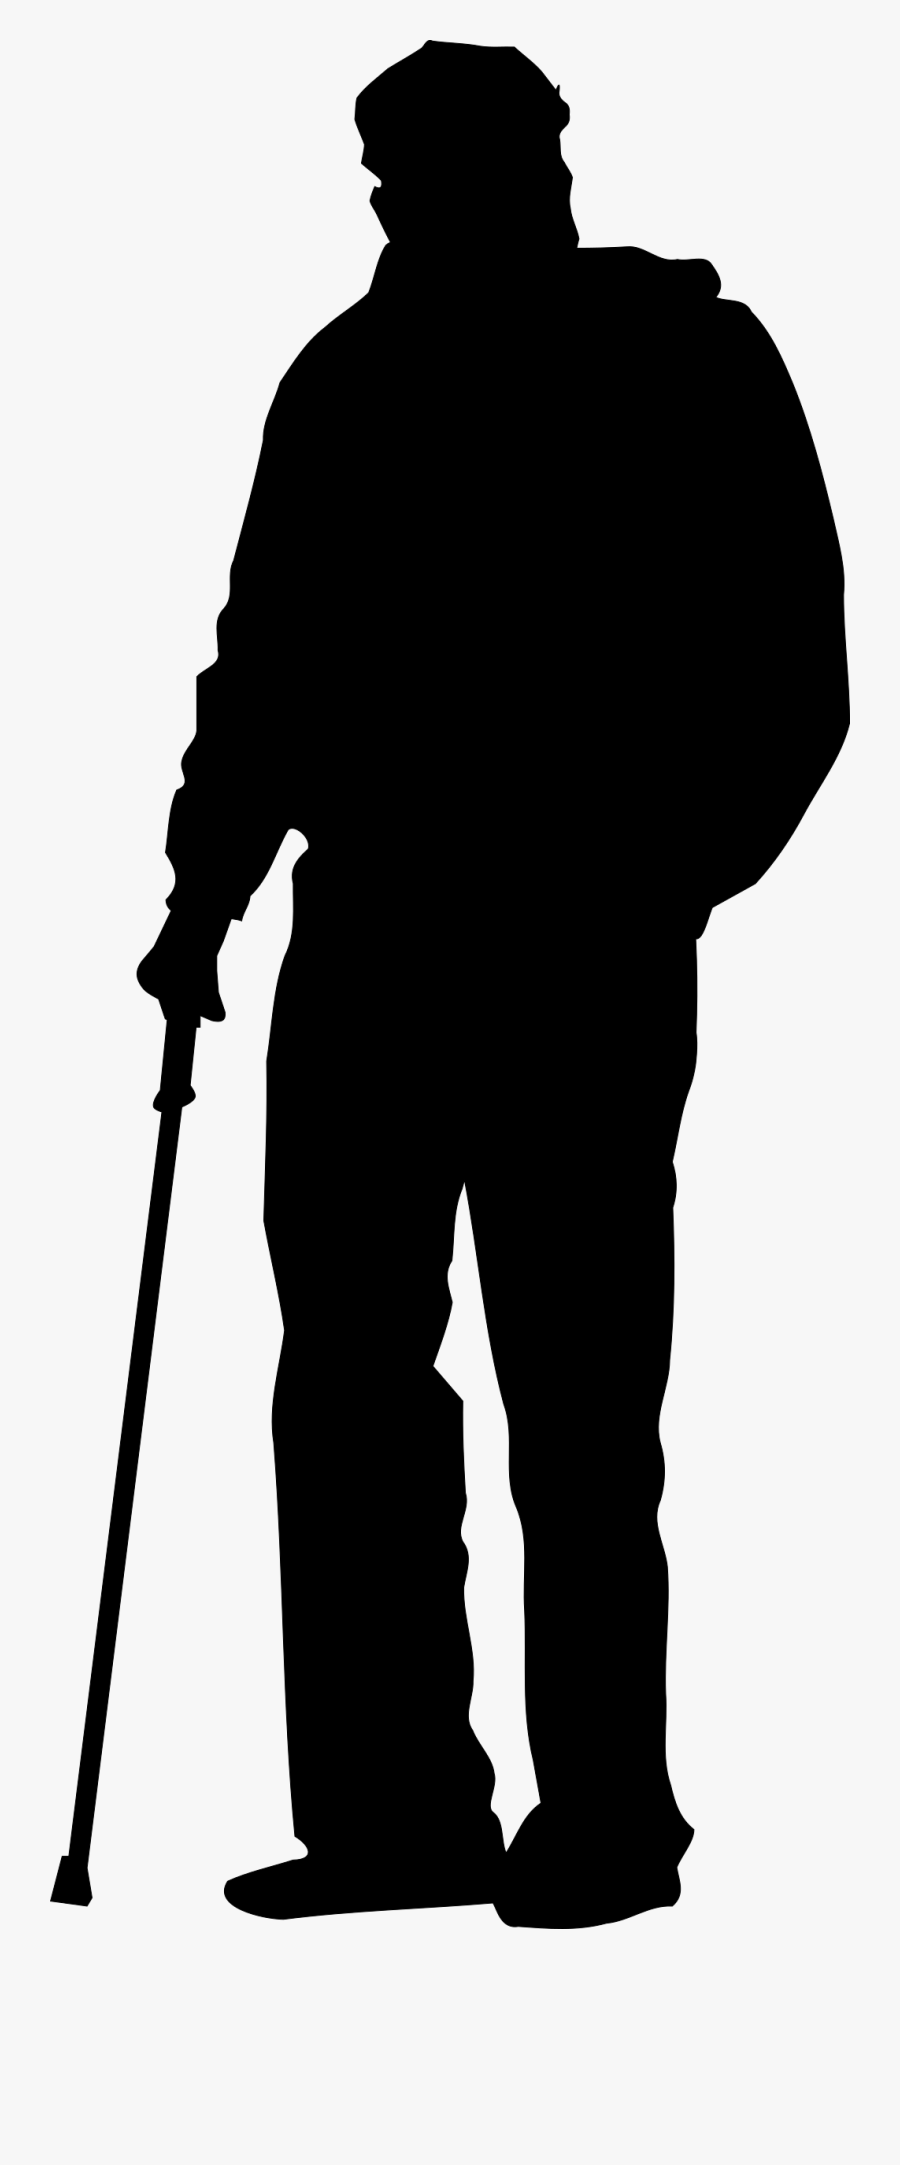 Old Man Silhouette Clip Art - Old Man Silhouette Png, Transparent Clipart